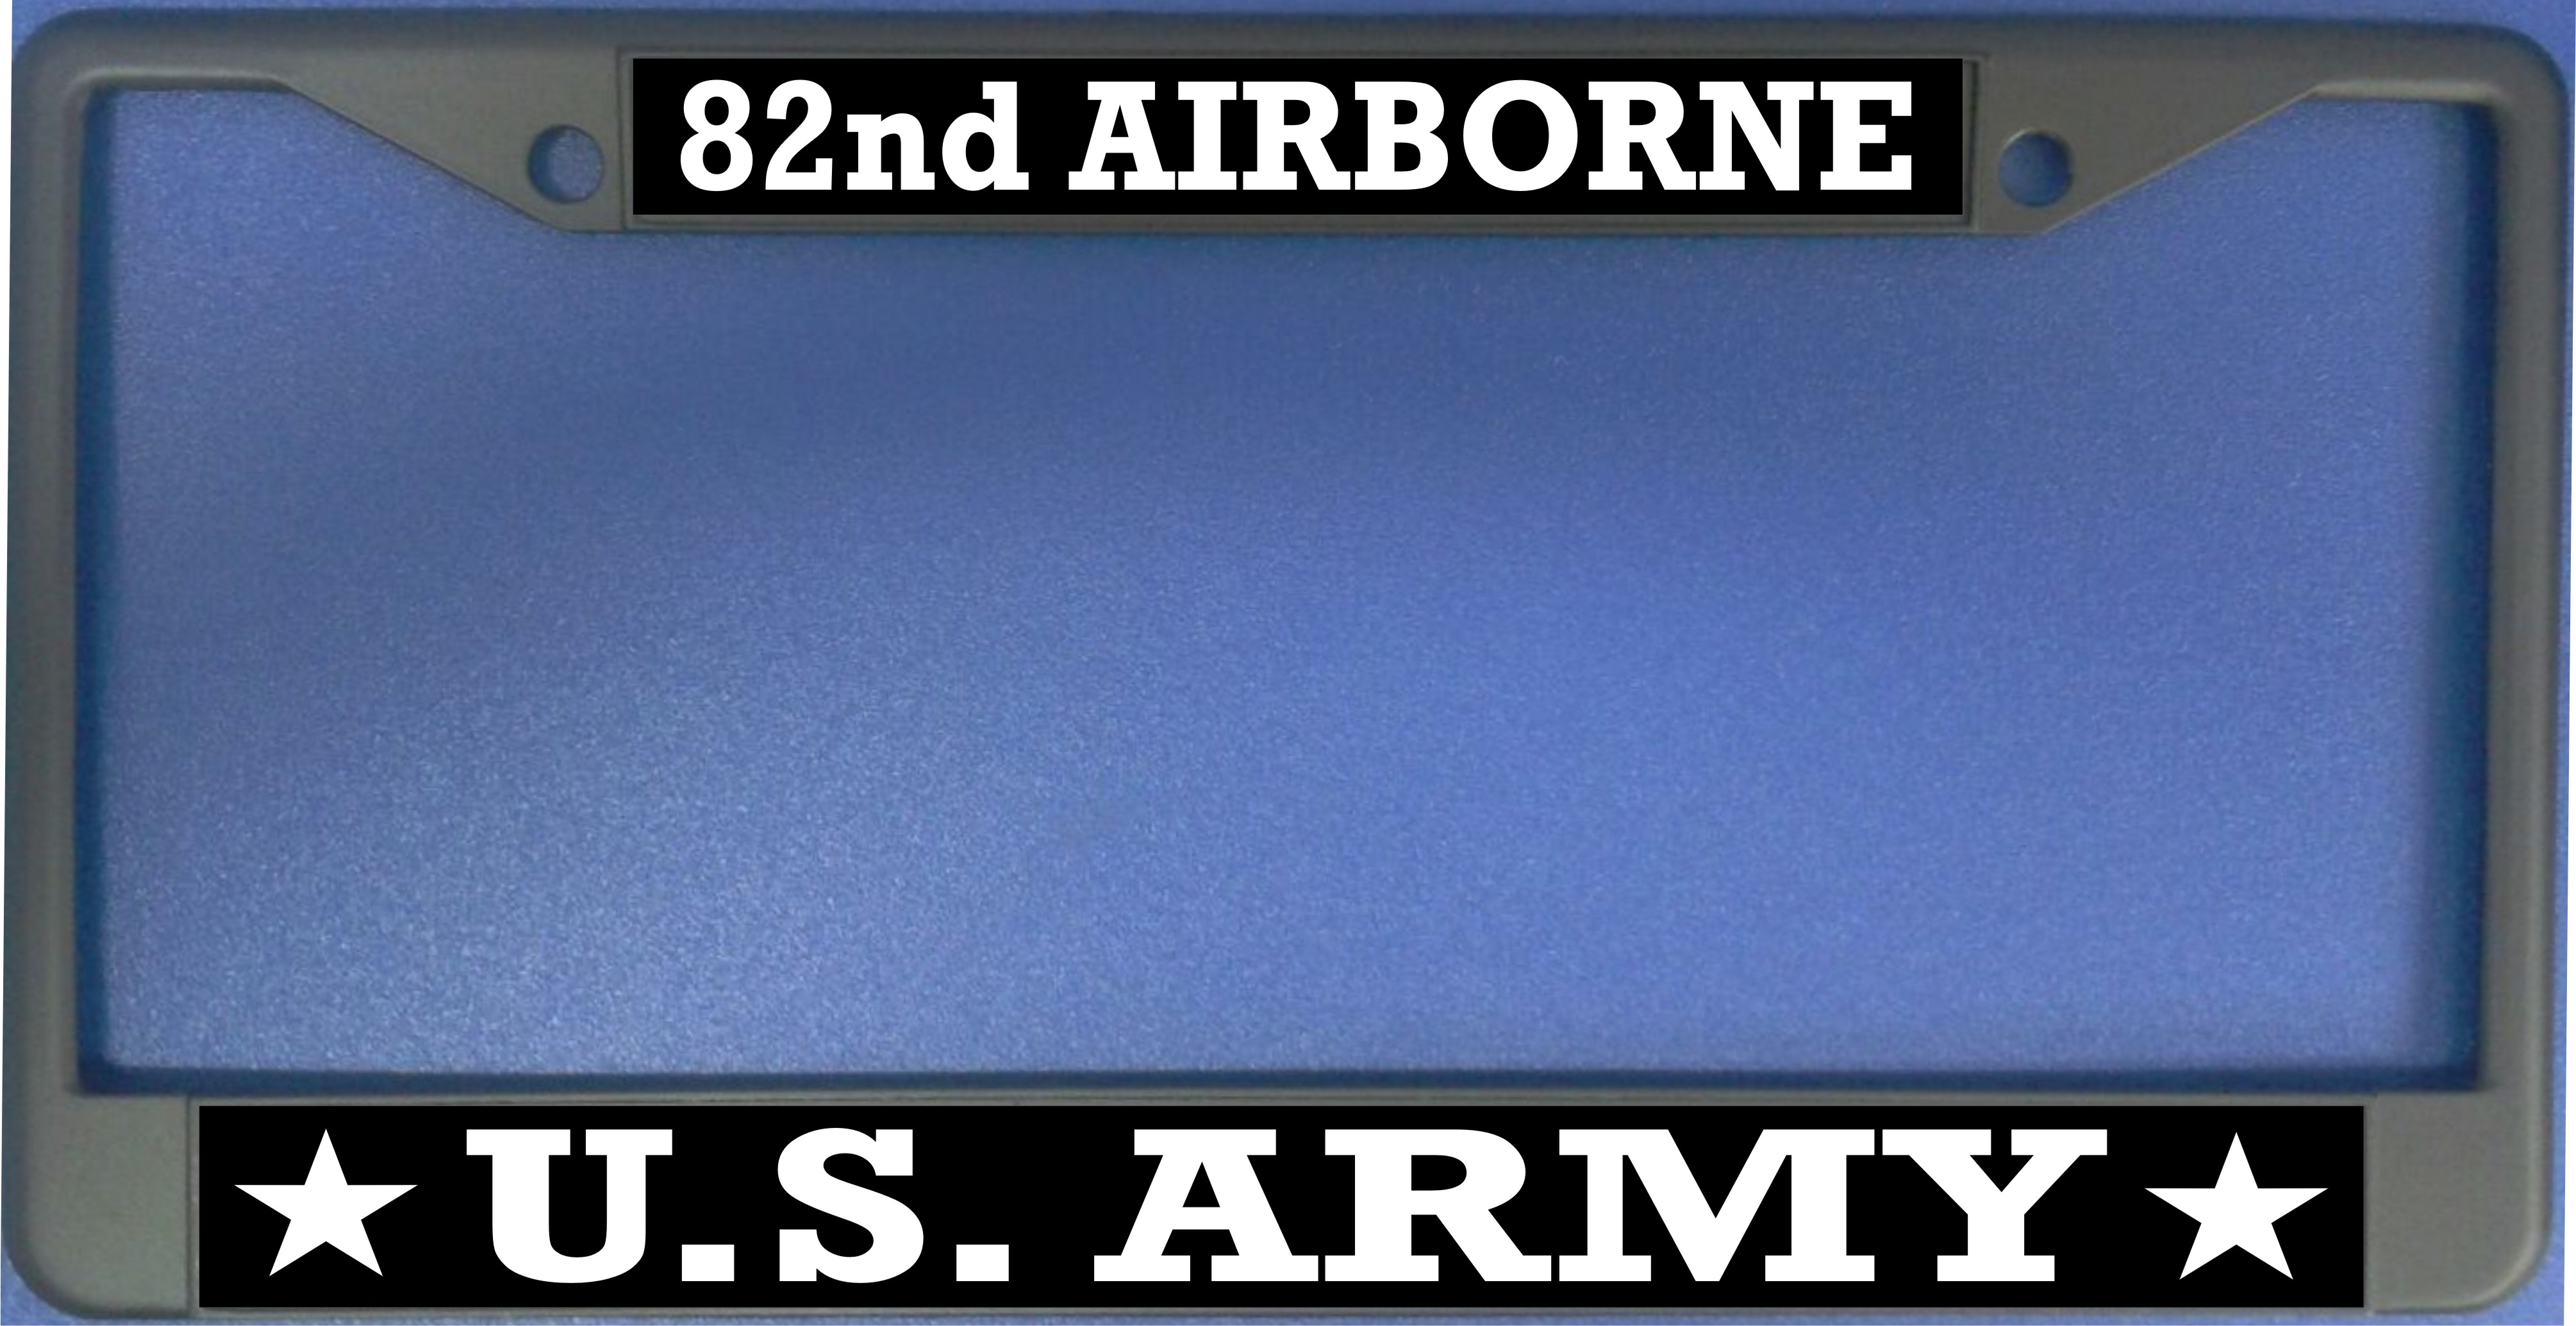 U.S. ARMY 82nd Airborne Photo License Plate Frame  Free Screw CAPs with this Frame